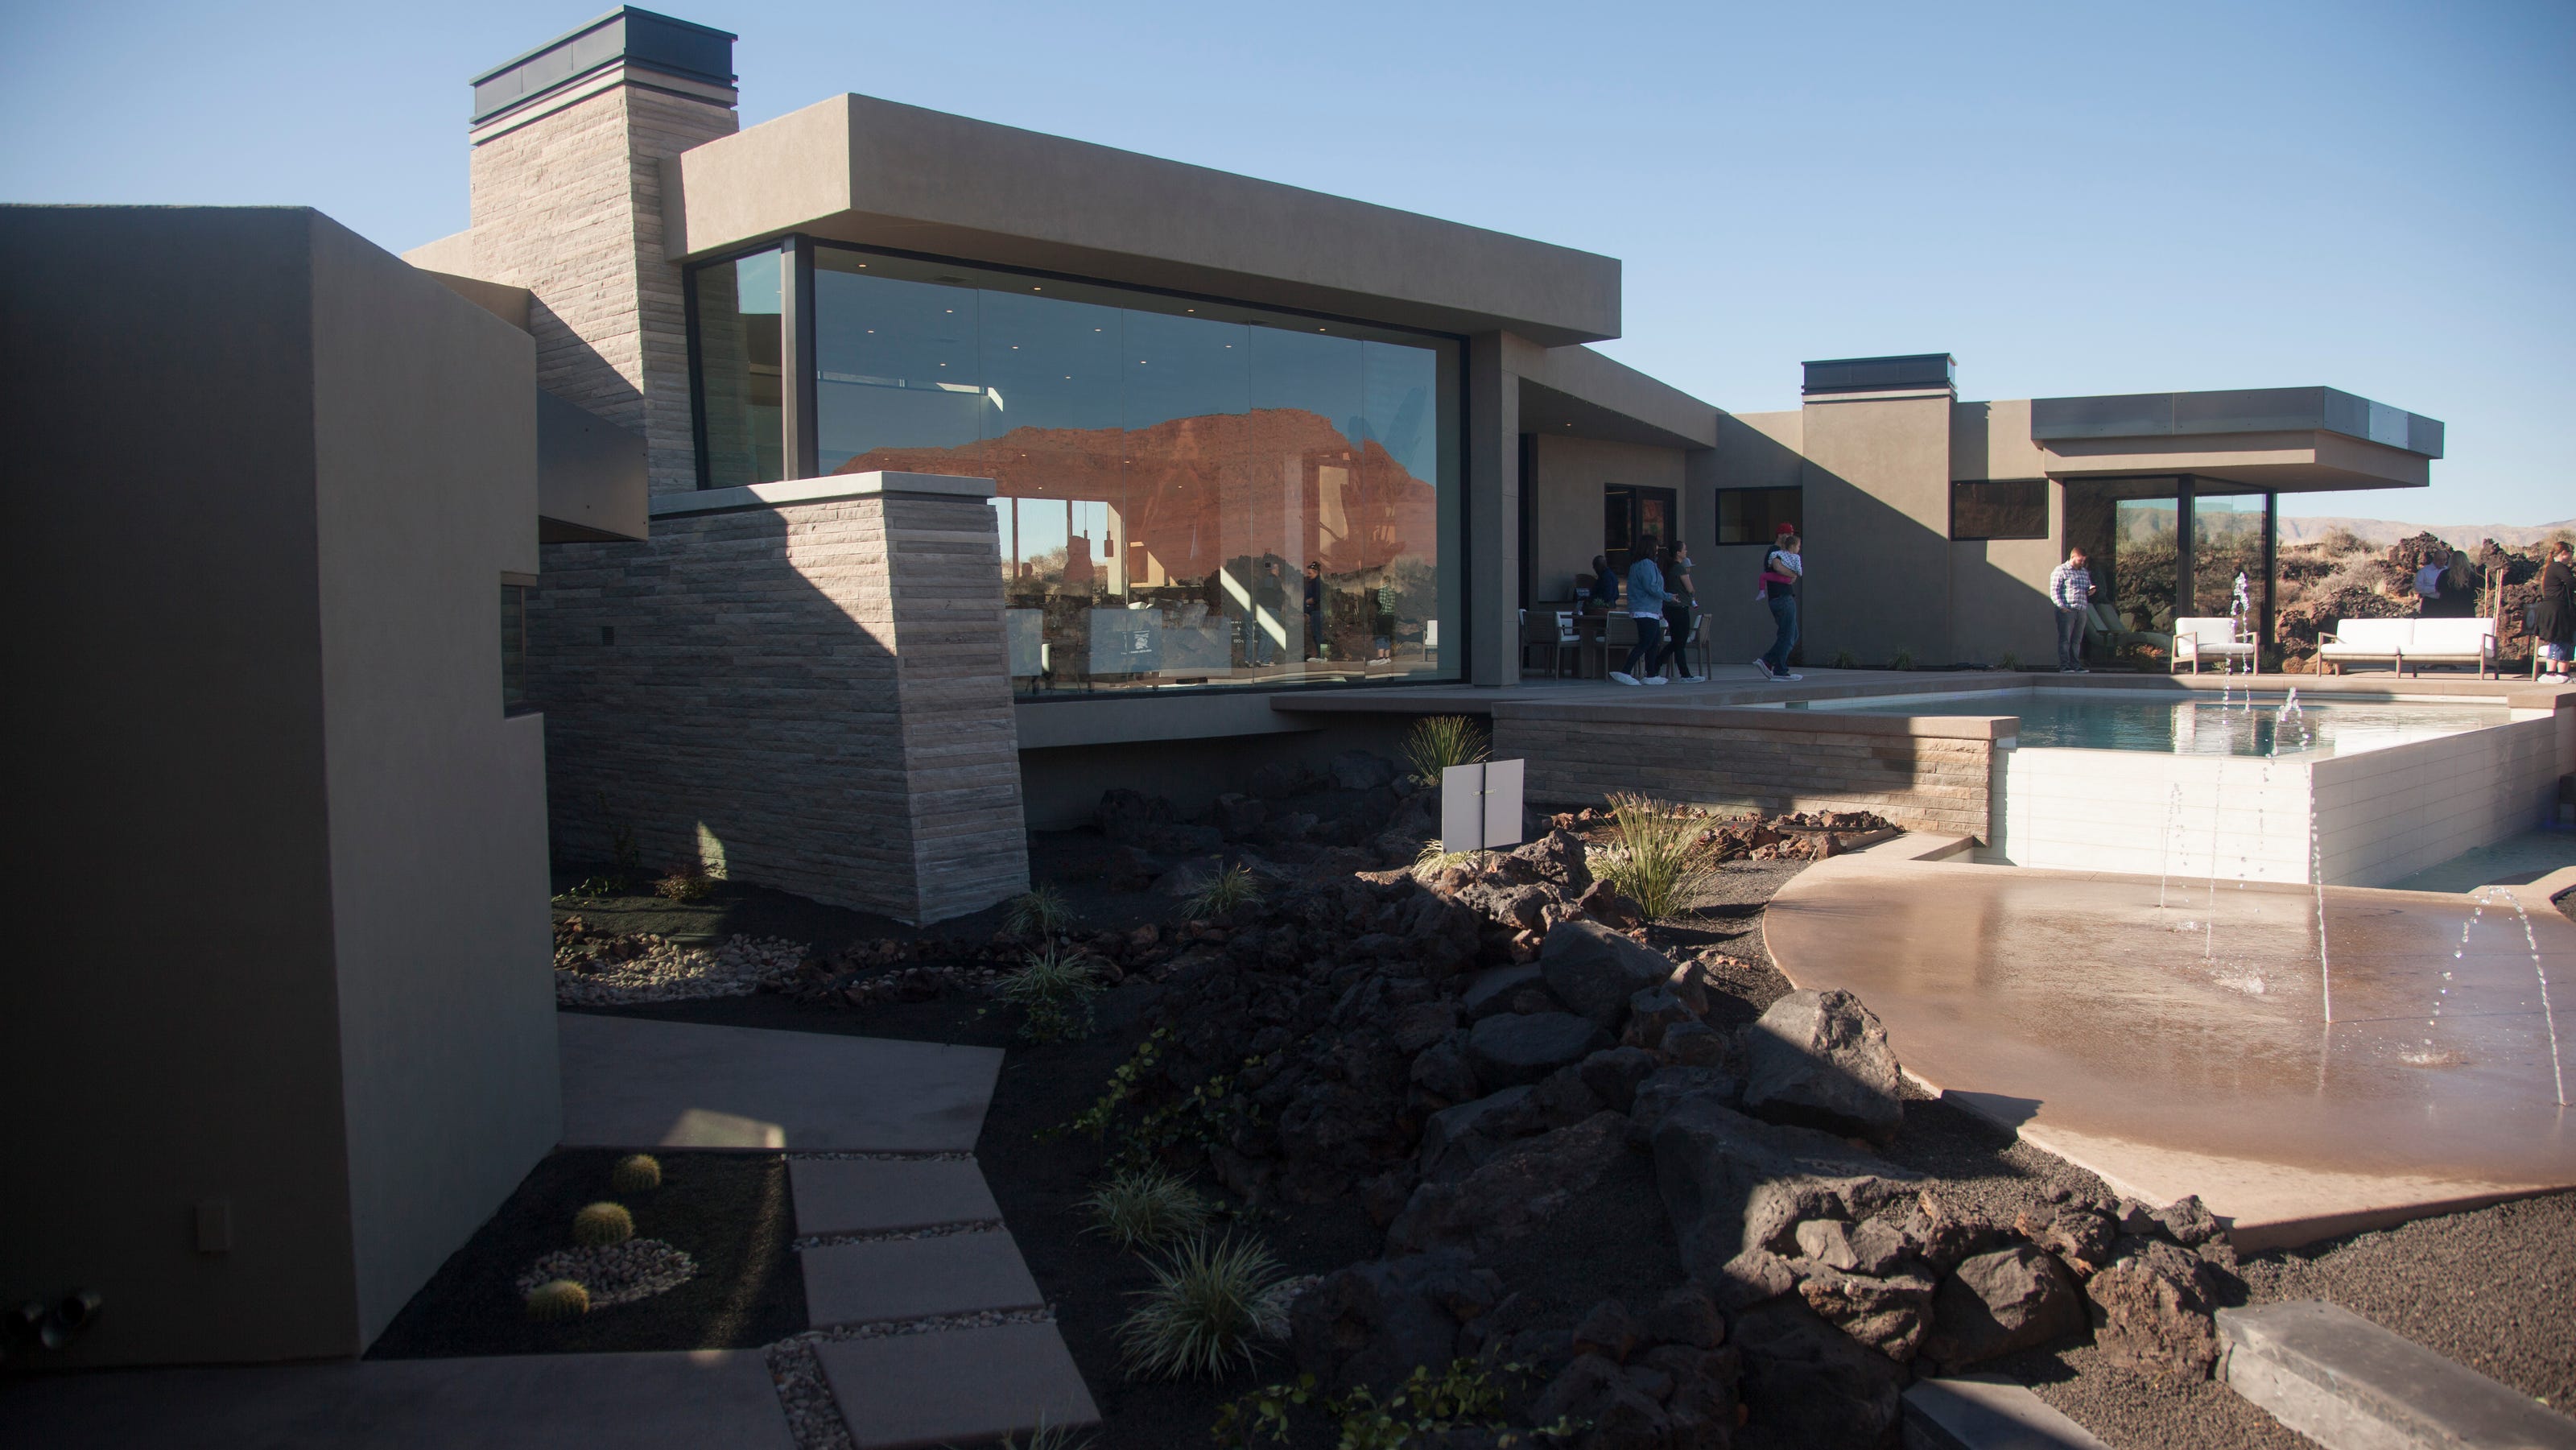 St. Parade of Homes stuns for 30th year in Southern Utah